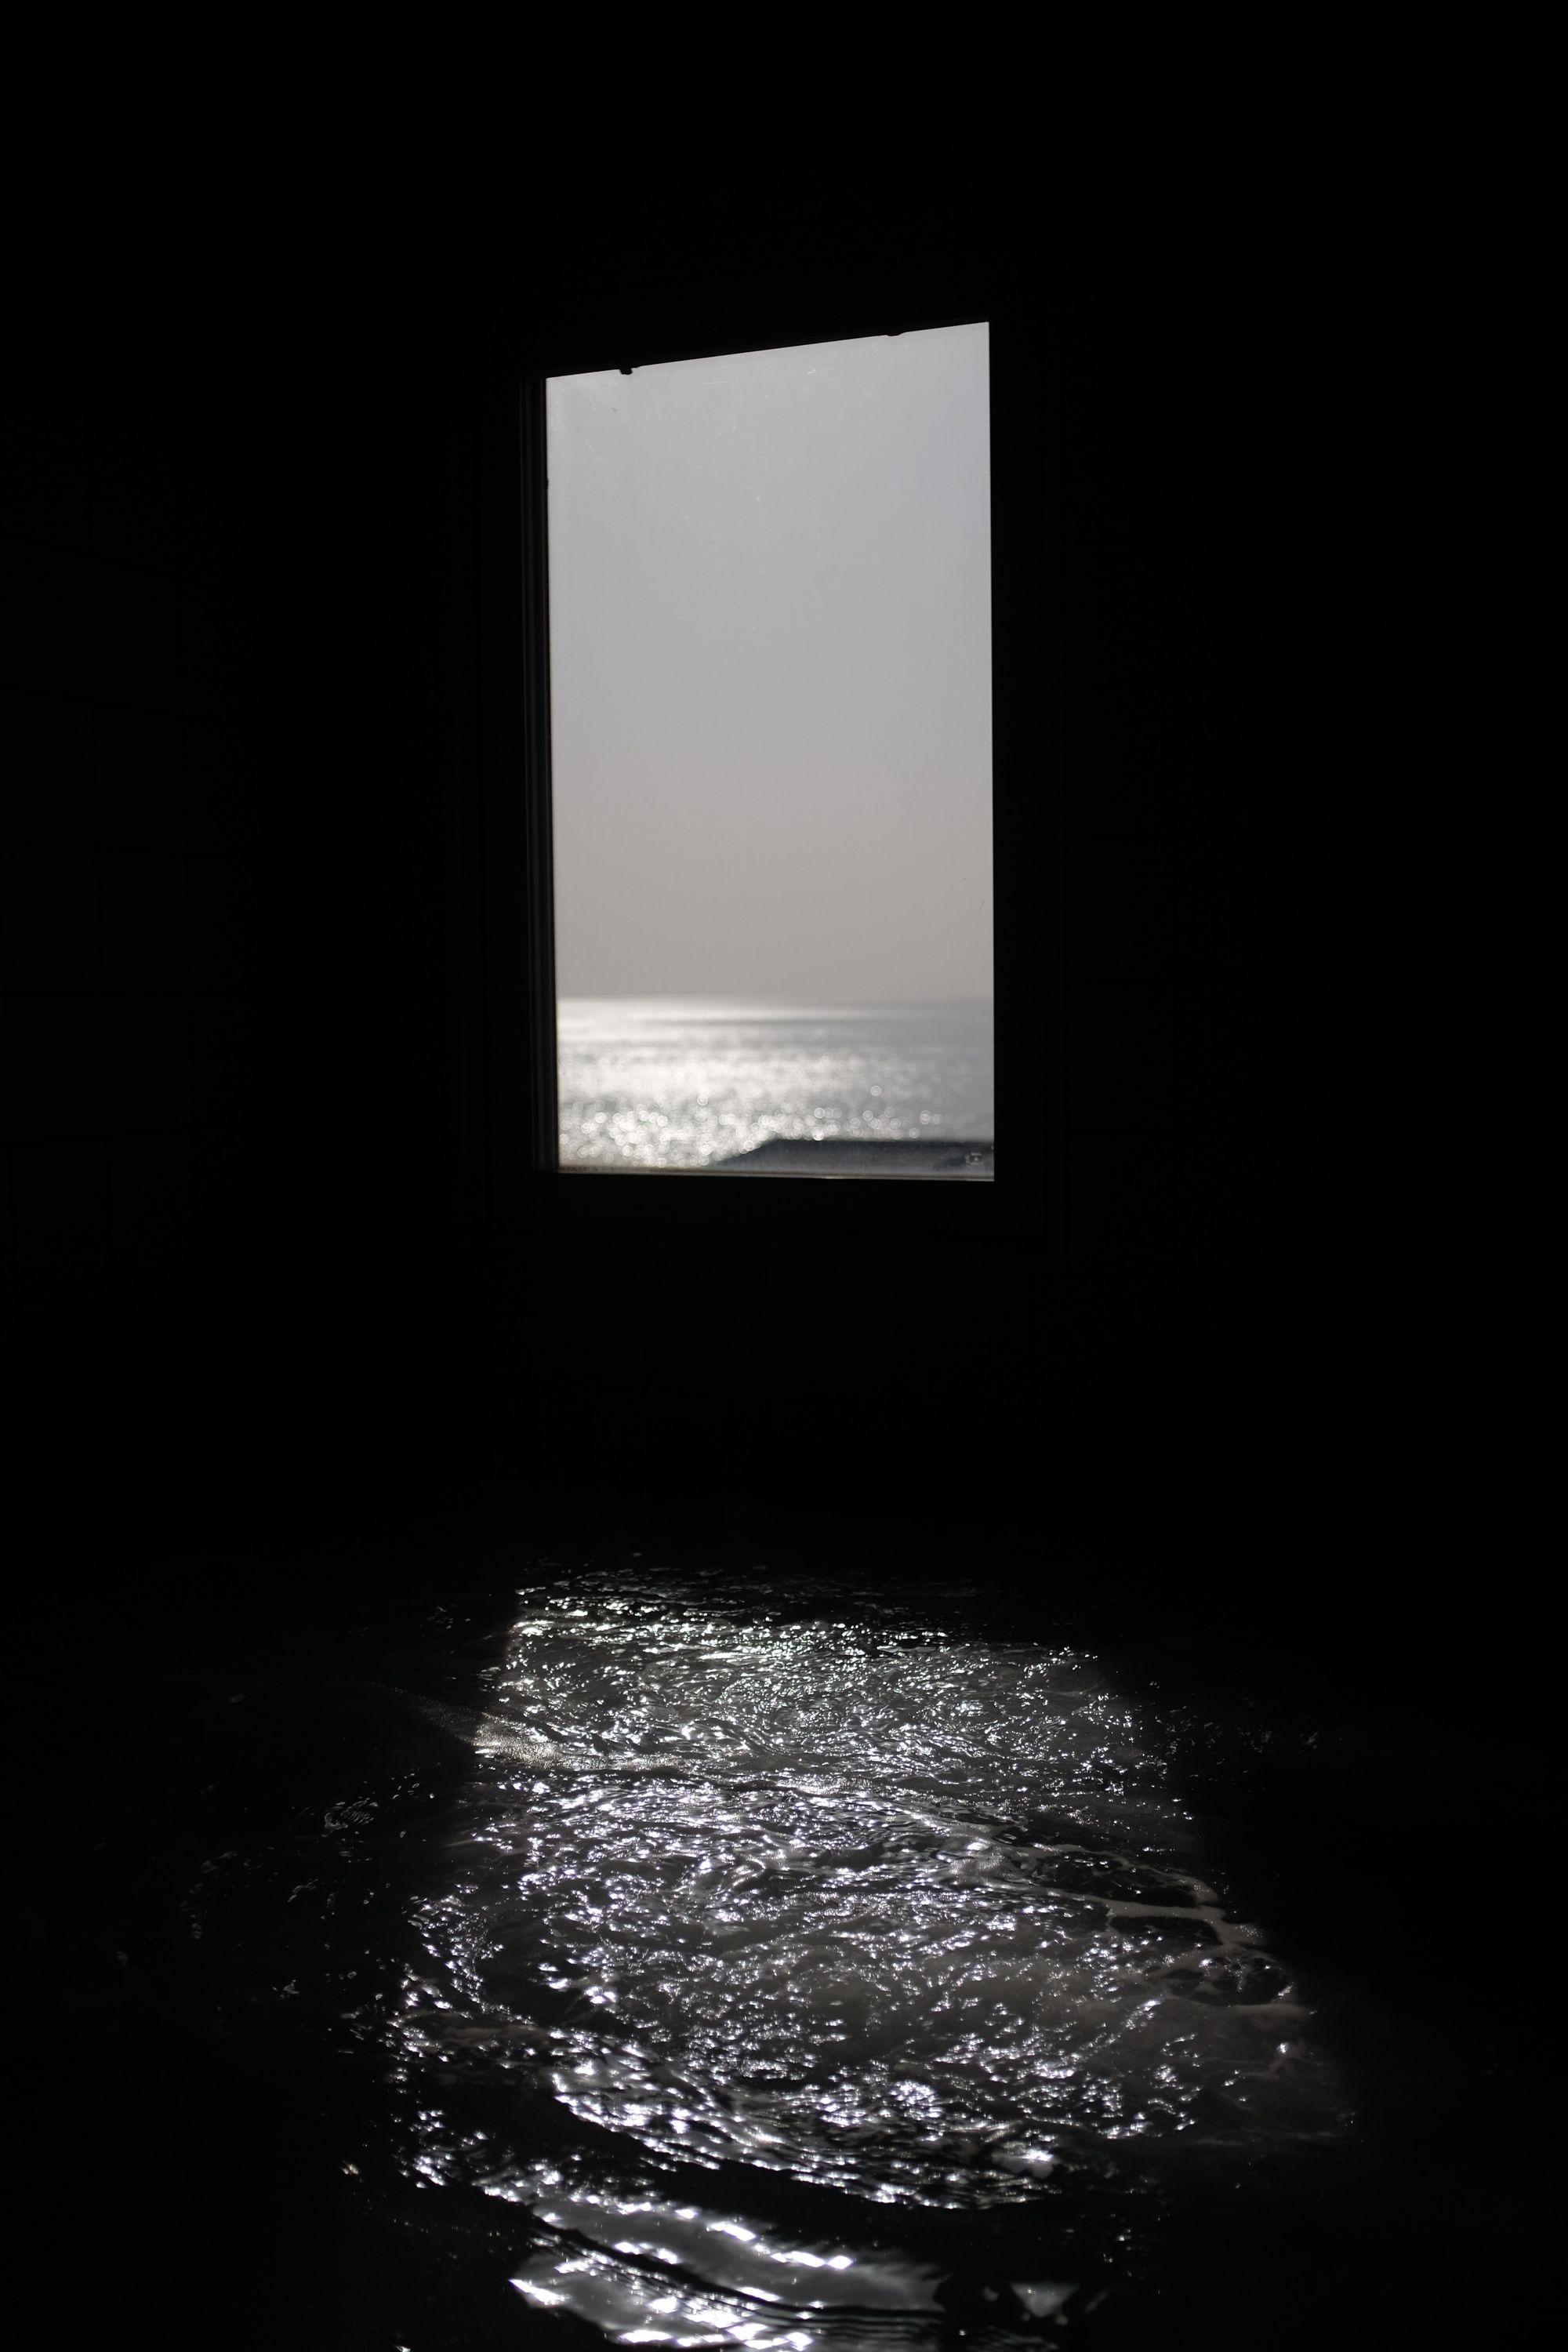 A view across the bathtub of a public bath and out a window shows the Inland Sea.